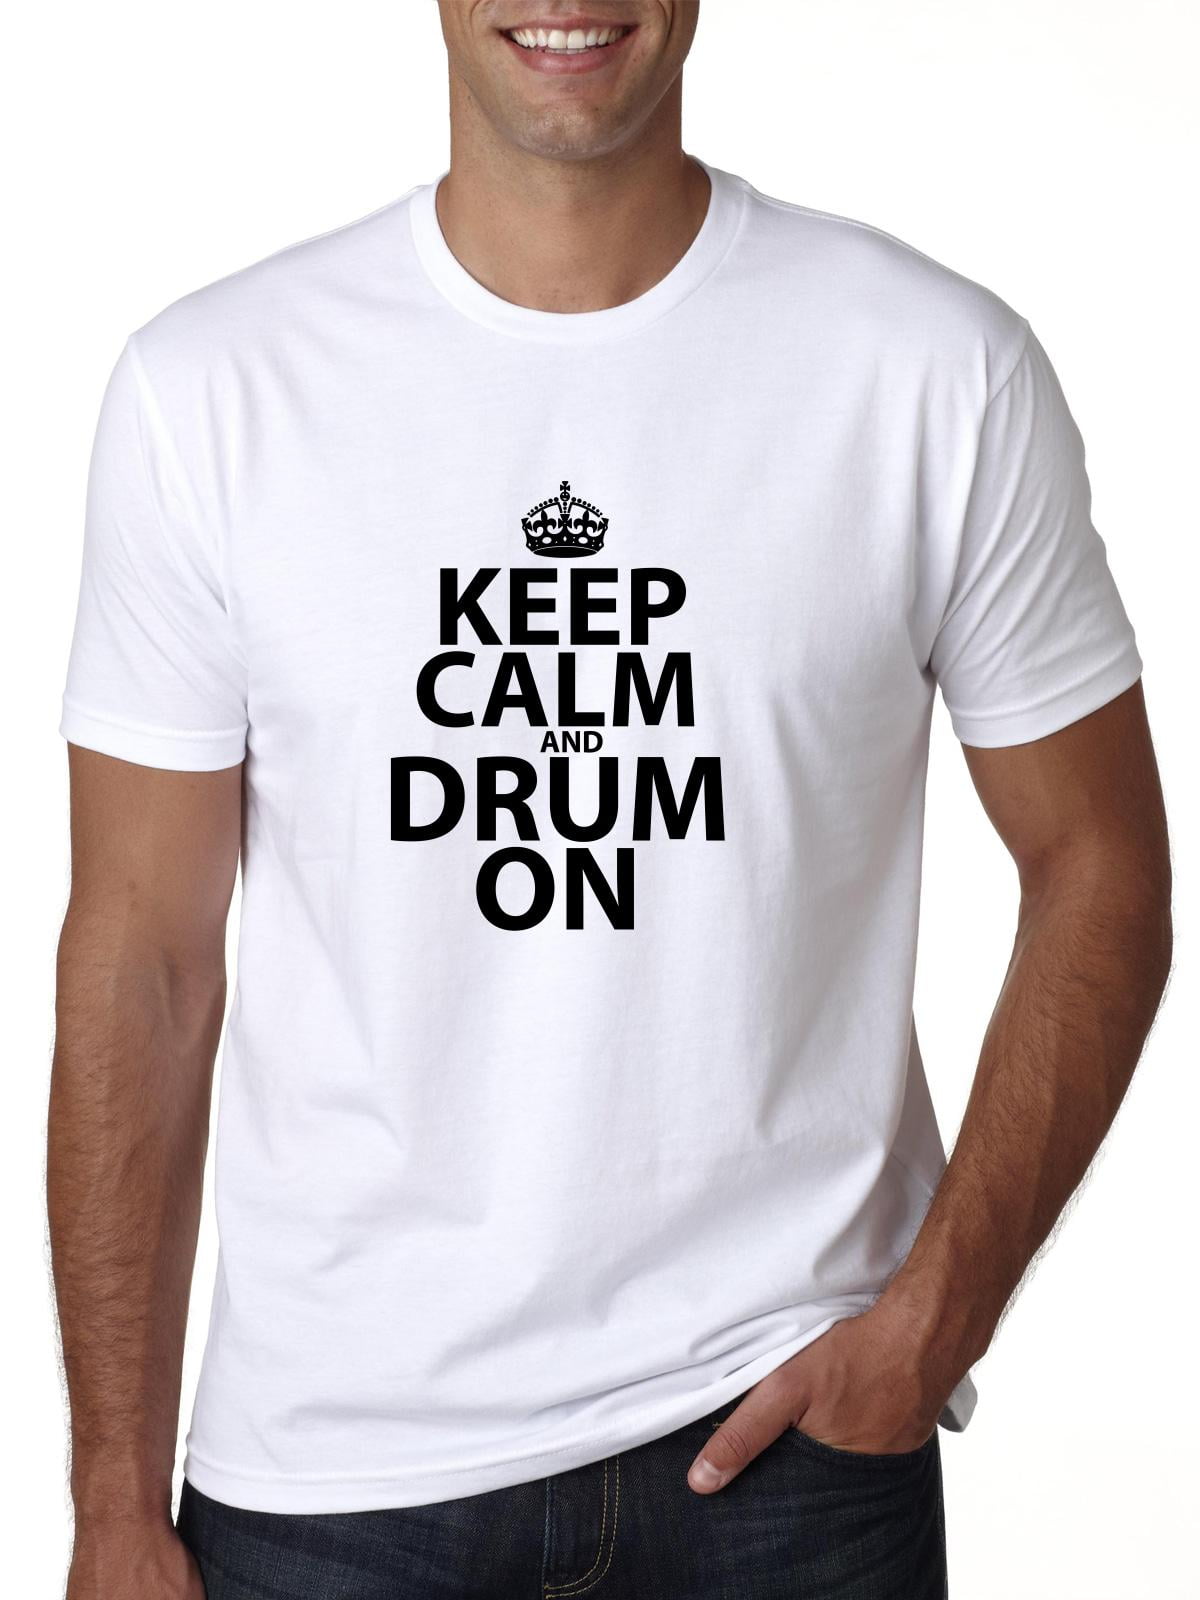 Hollywood Thread - Keep Calm And Drum On - Drummer Men's T-Shirt ...